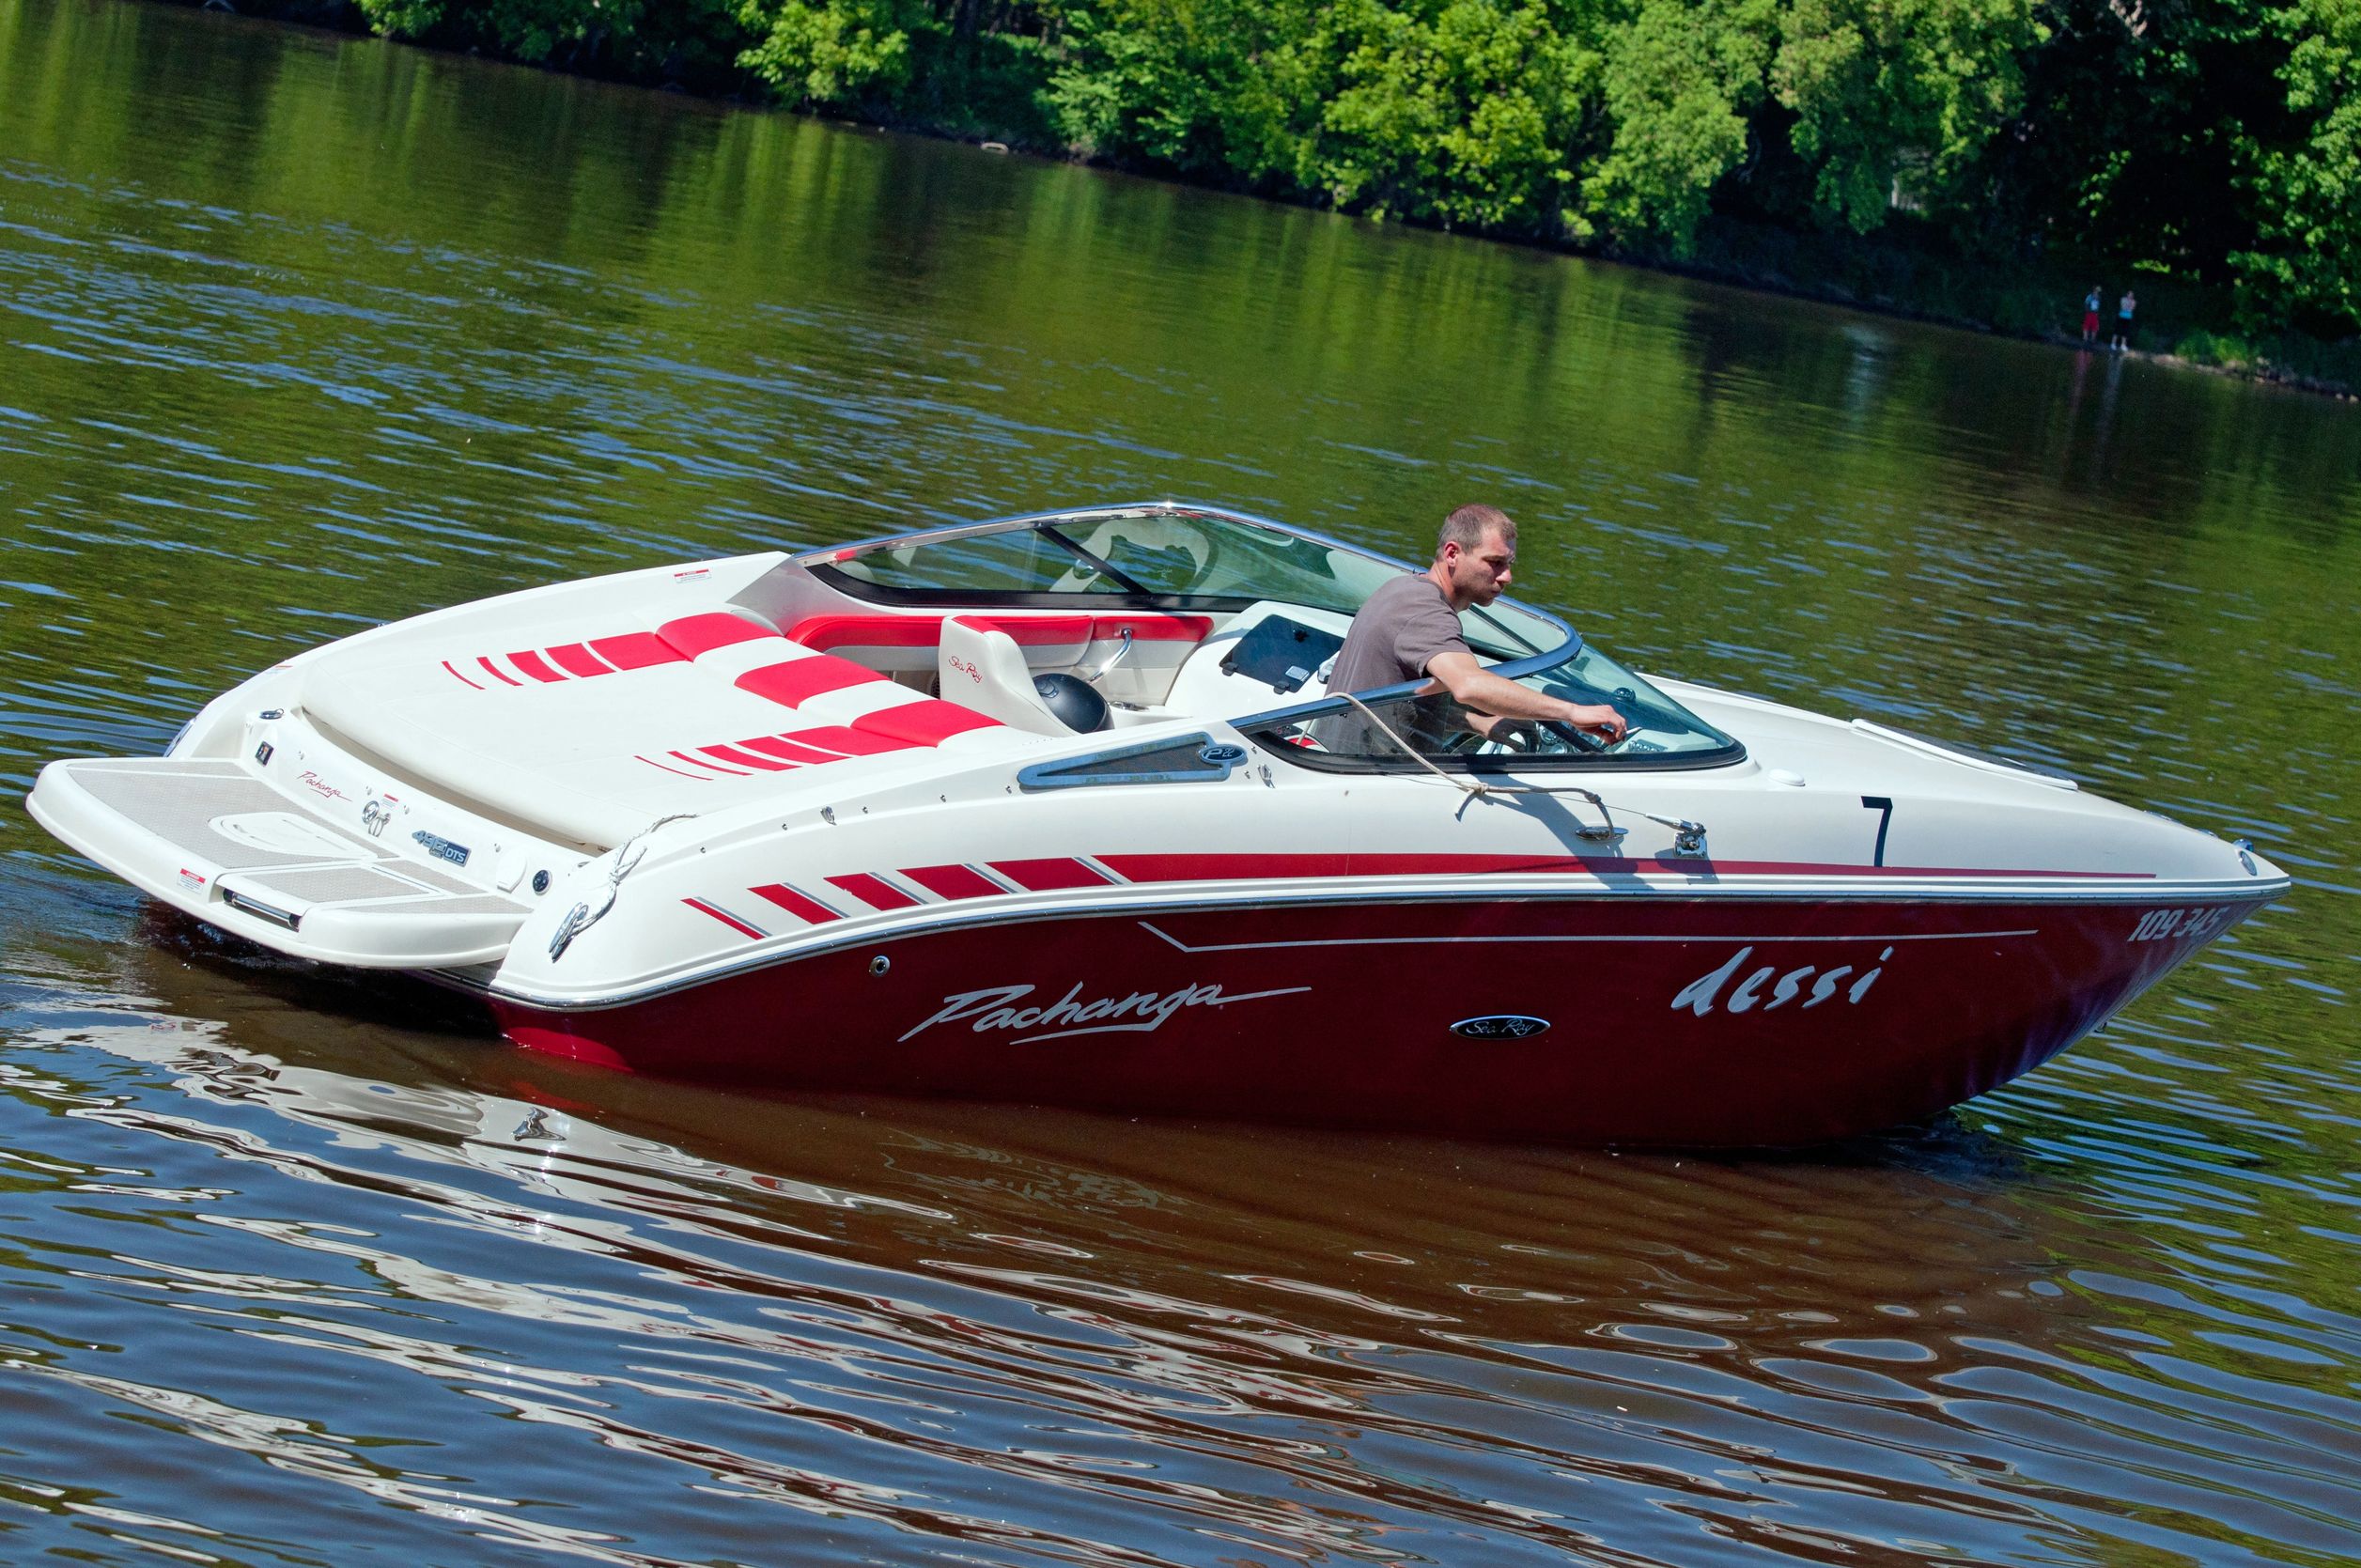 3 Factors to Consider When Financing Your First Boat in Florida